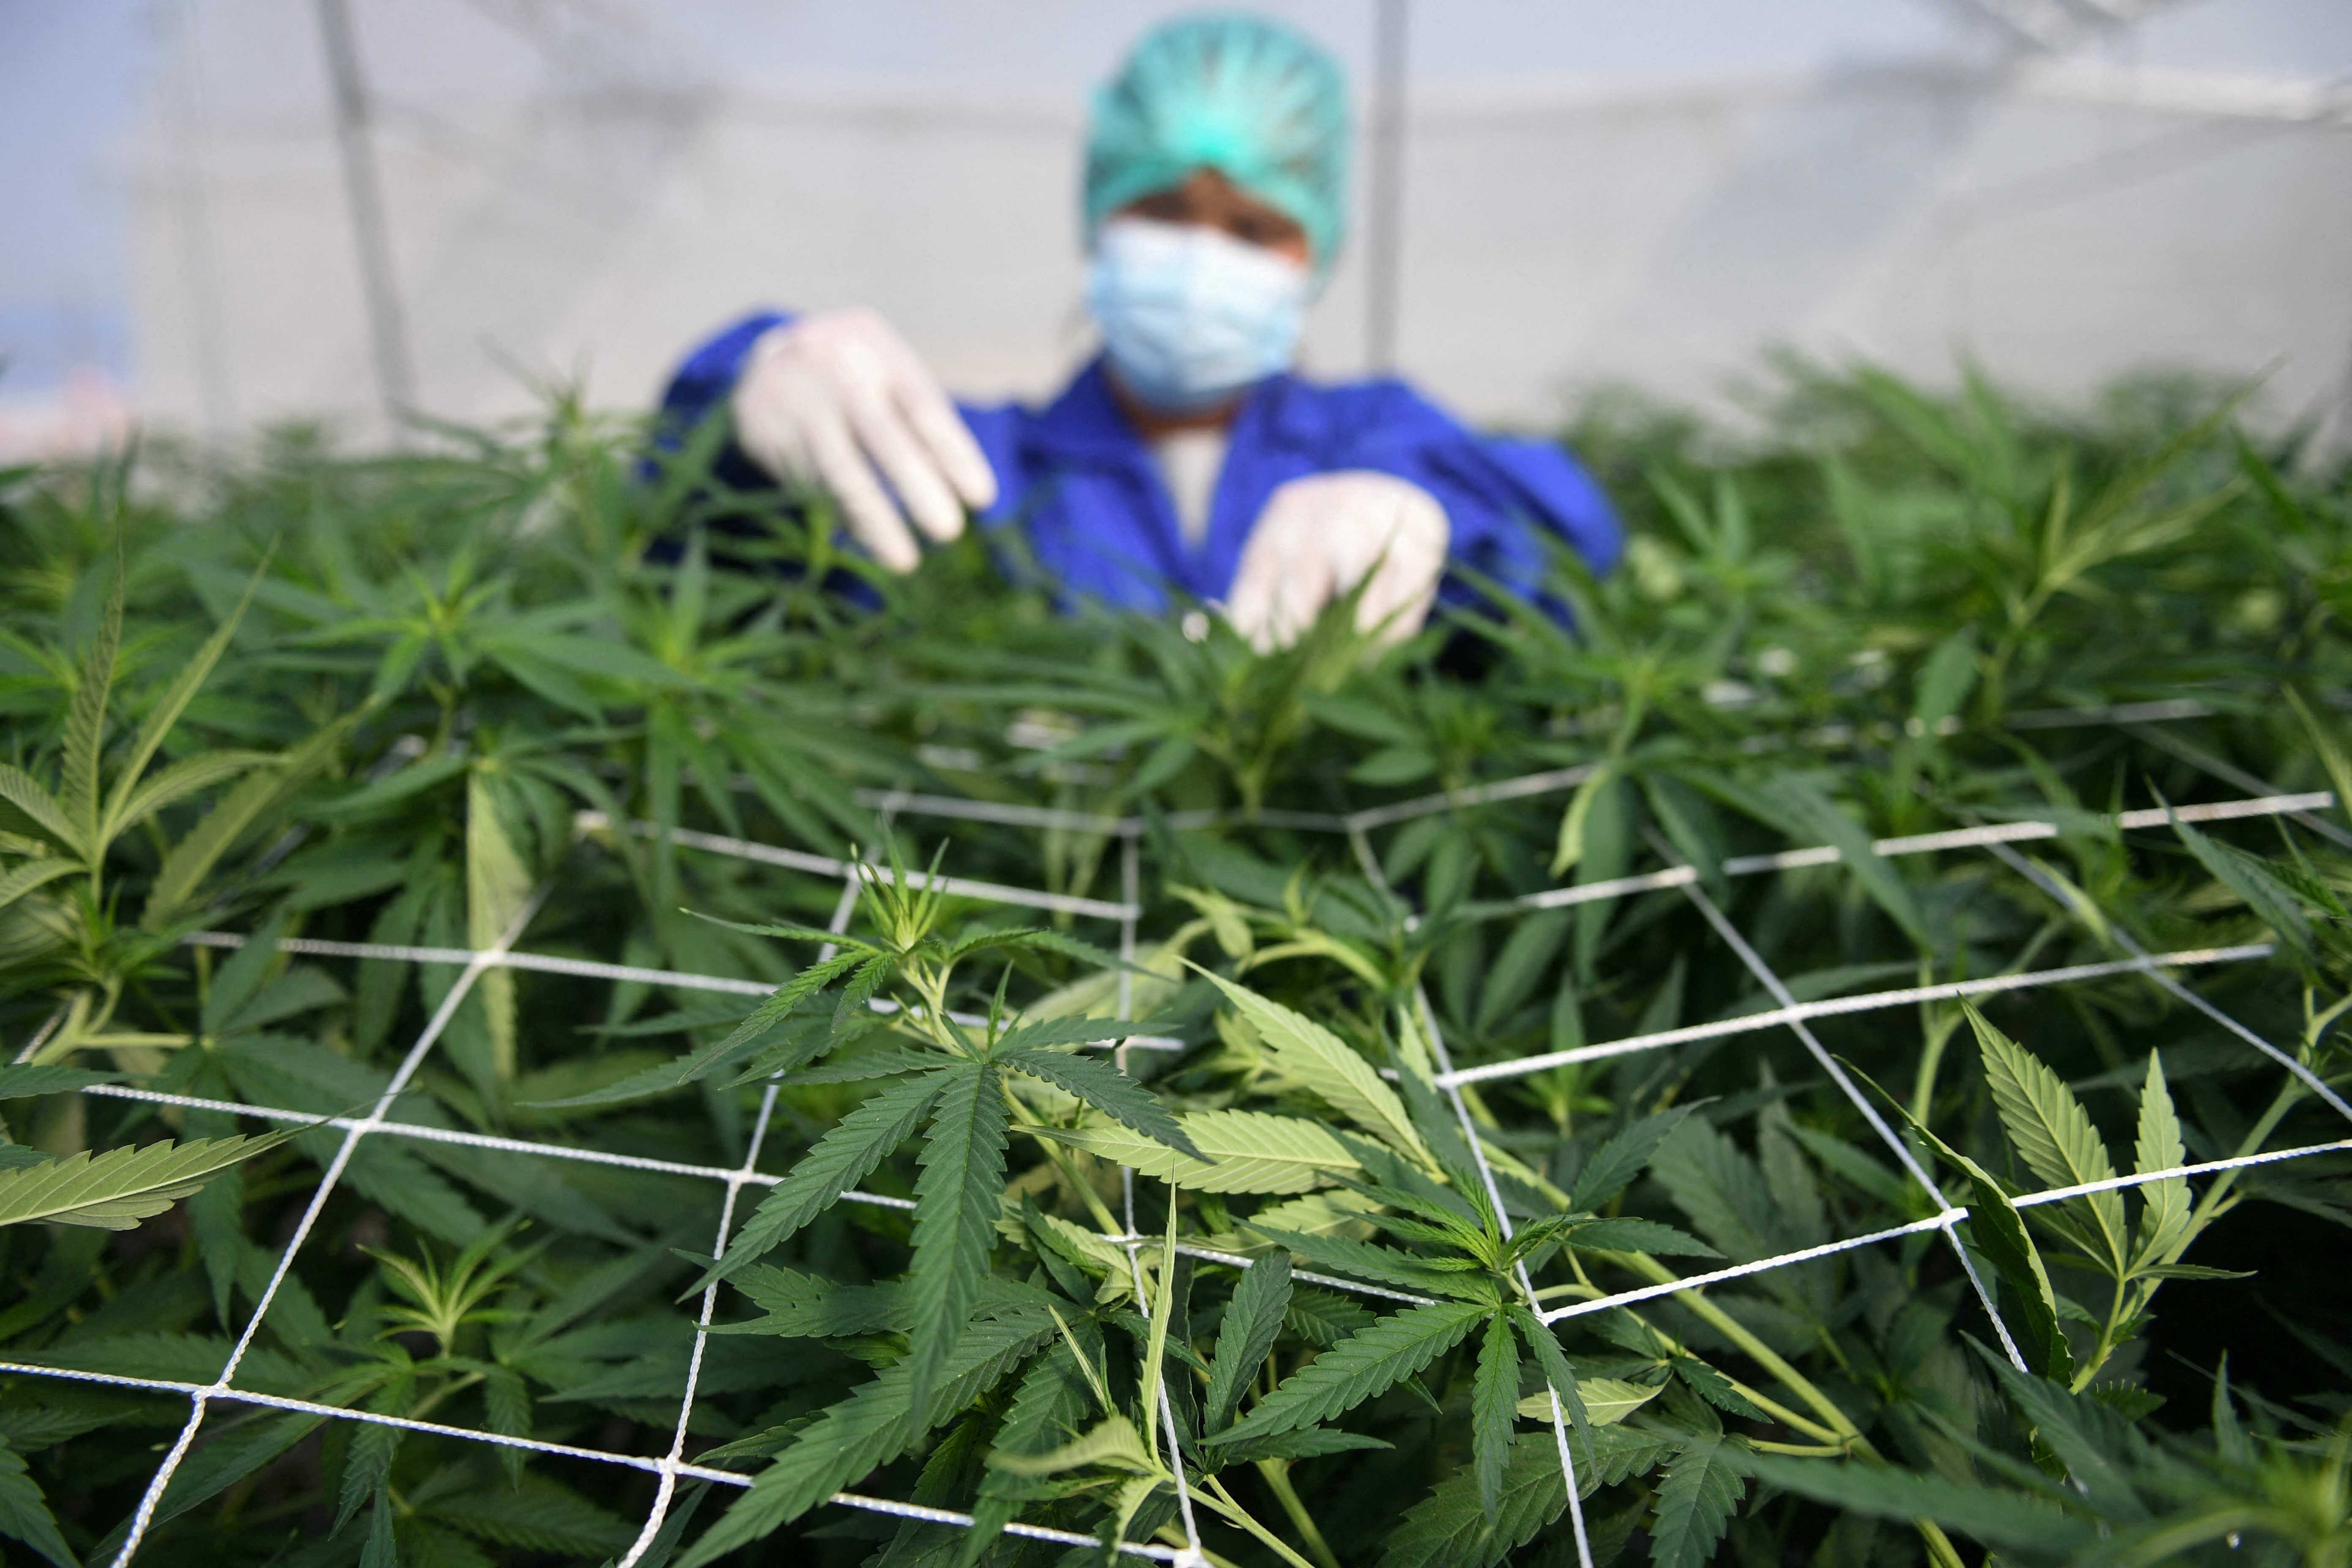 A worker inspects marijuana leaves and care for plants at the Rak Jang farm, one of the first farms that has been given permission by the Thai government to grow cannabis and sell products to medical facilities, in Nakhon Ratchasima